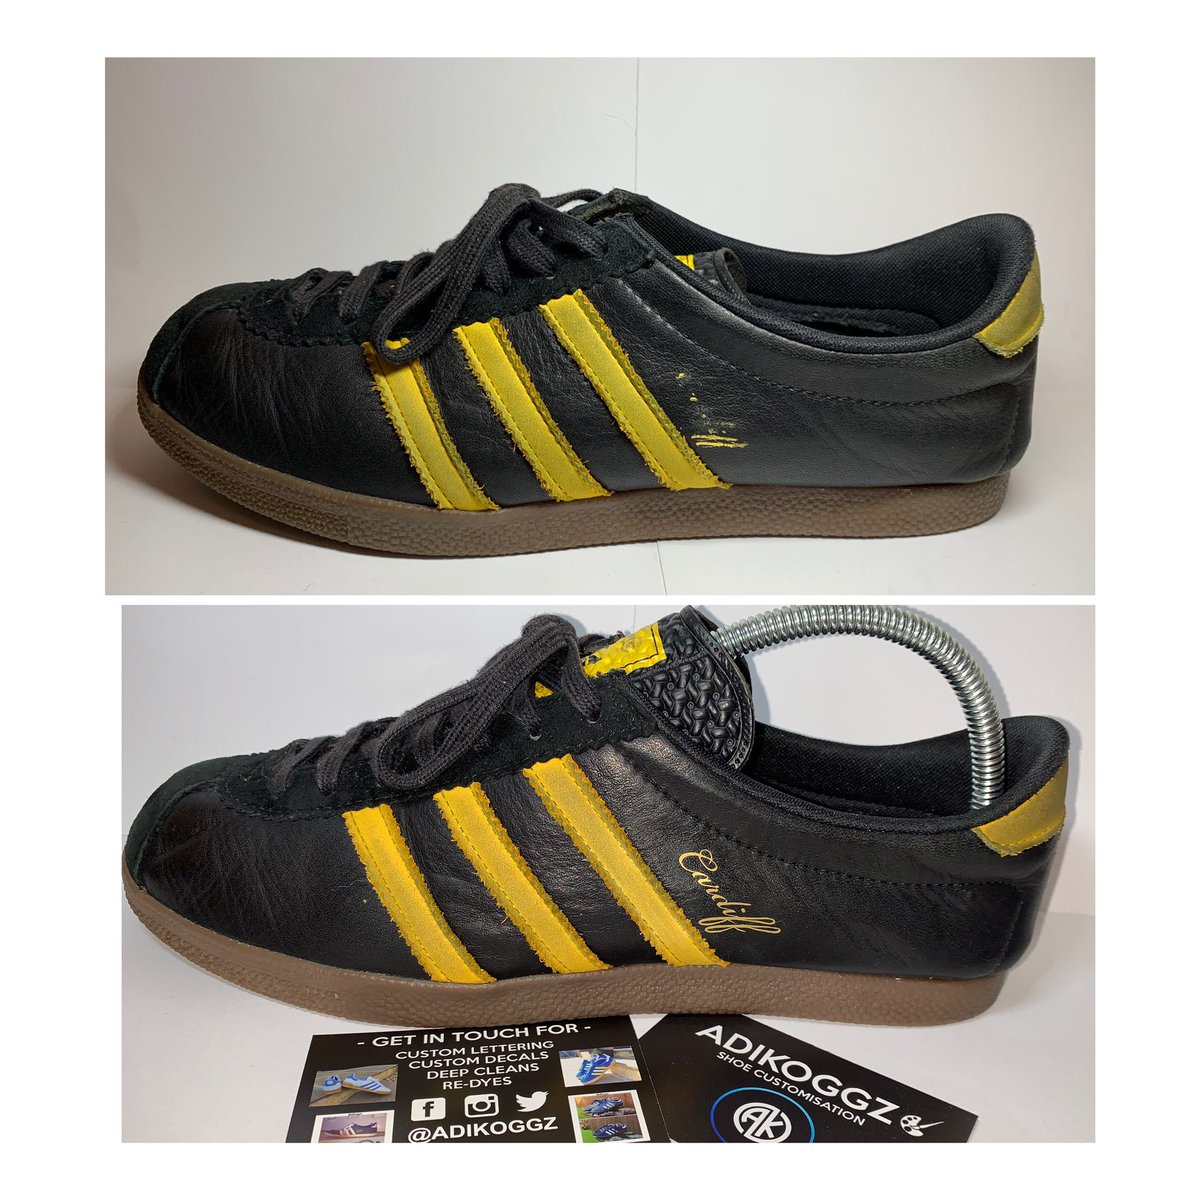 Adikoggz Trainer Customisation Twitter: "Morning guys! Restored a pair of adidas Cardiff 😝 Text removed, paint matched, text re applied. Took doing to the text a pretty much